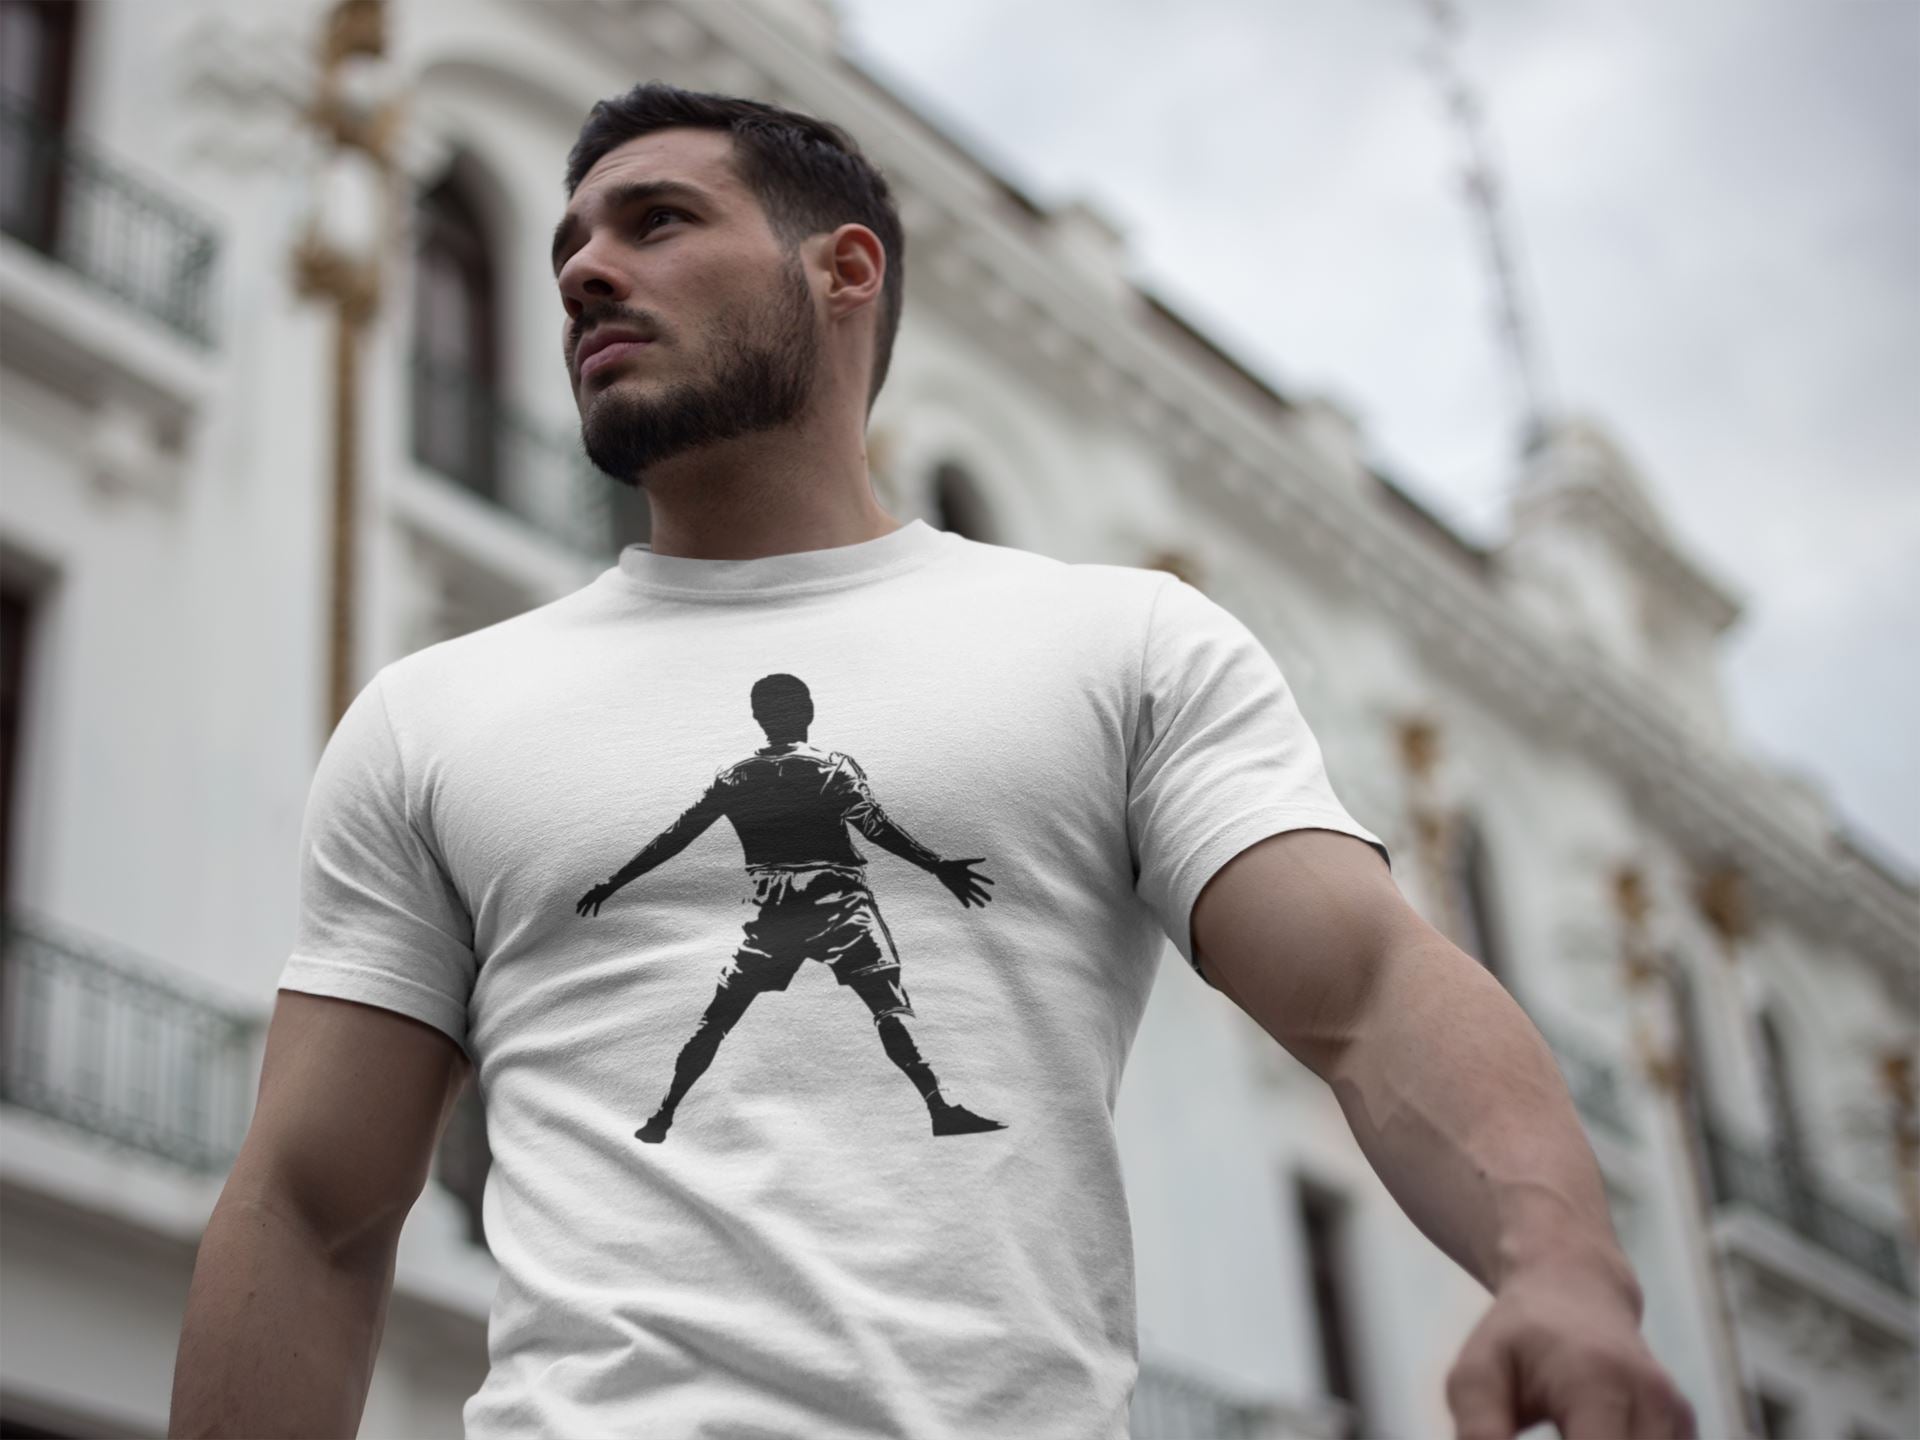 Cristiano Ronaldo Sii Pose Shadow Official White T Shirt for Men and Women freeshipping - Catch My Drift India